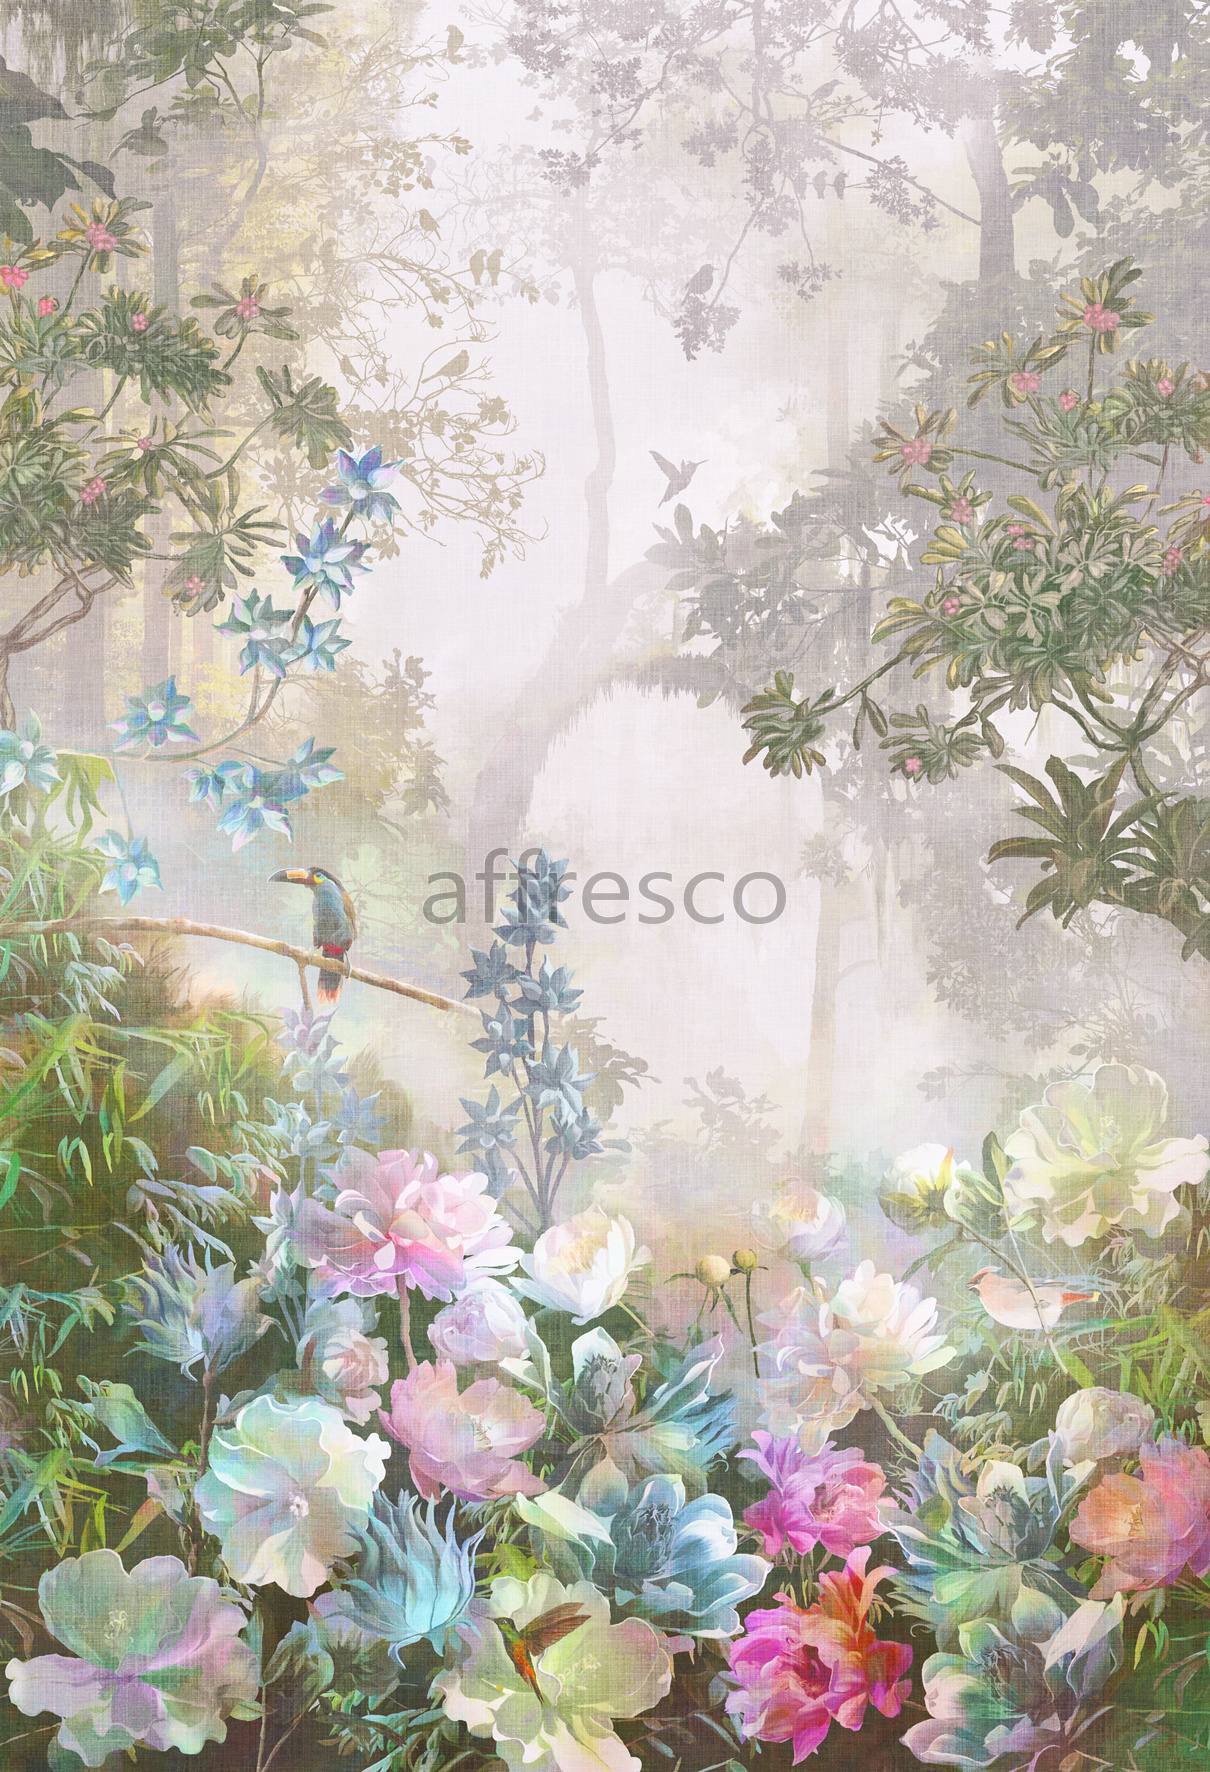 ID135783 | Picturesque scenery | Fairy Forest | Affresco Factory